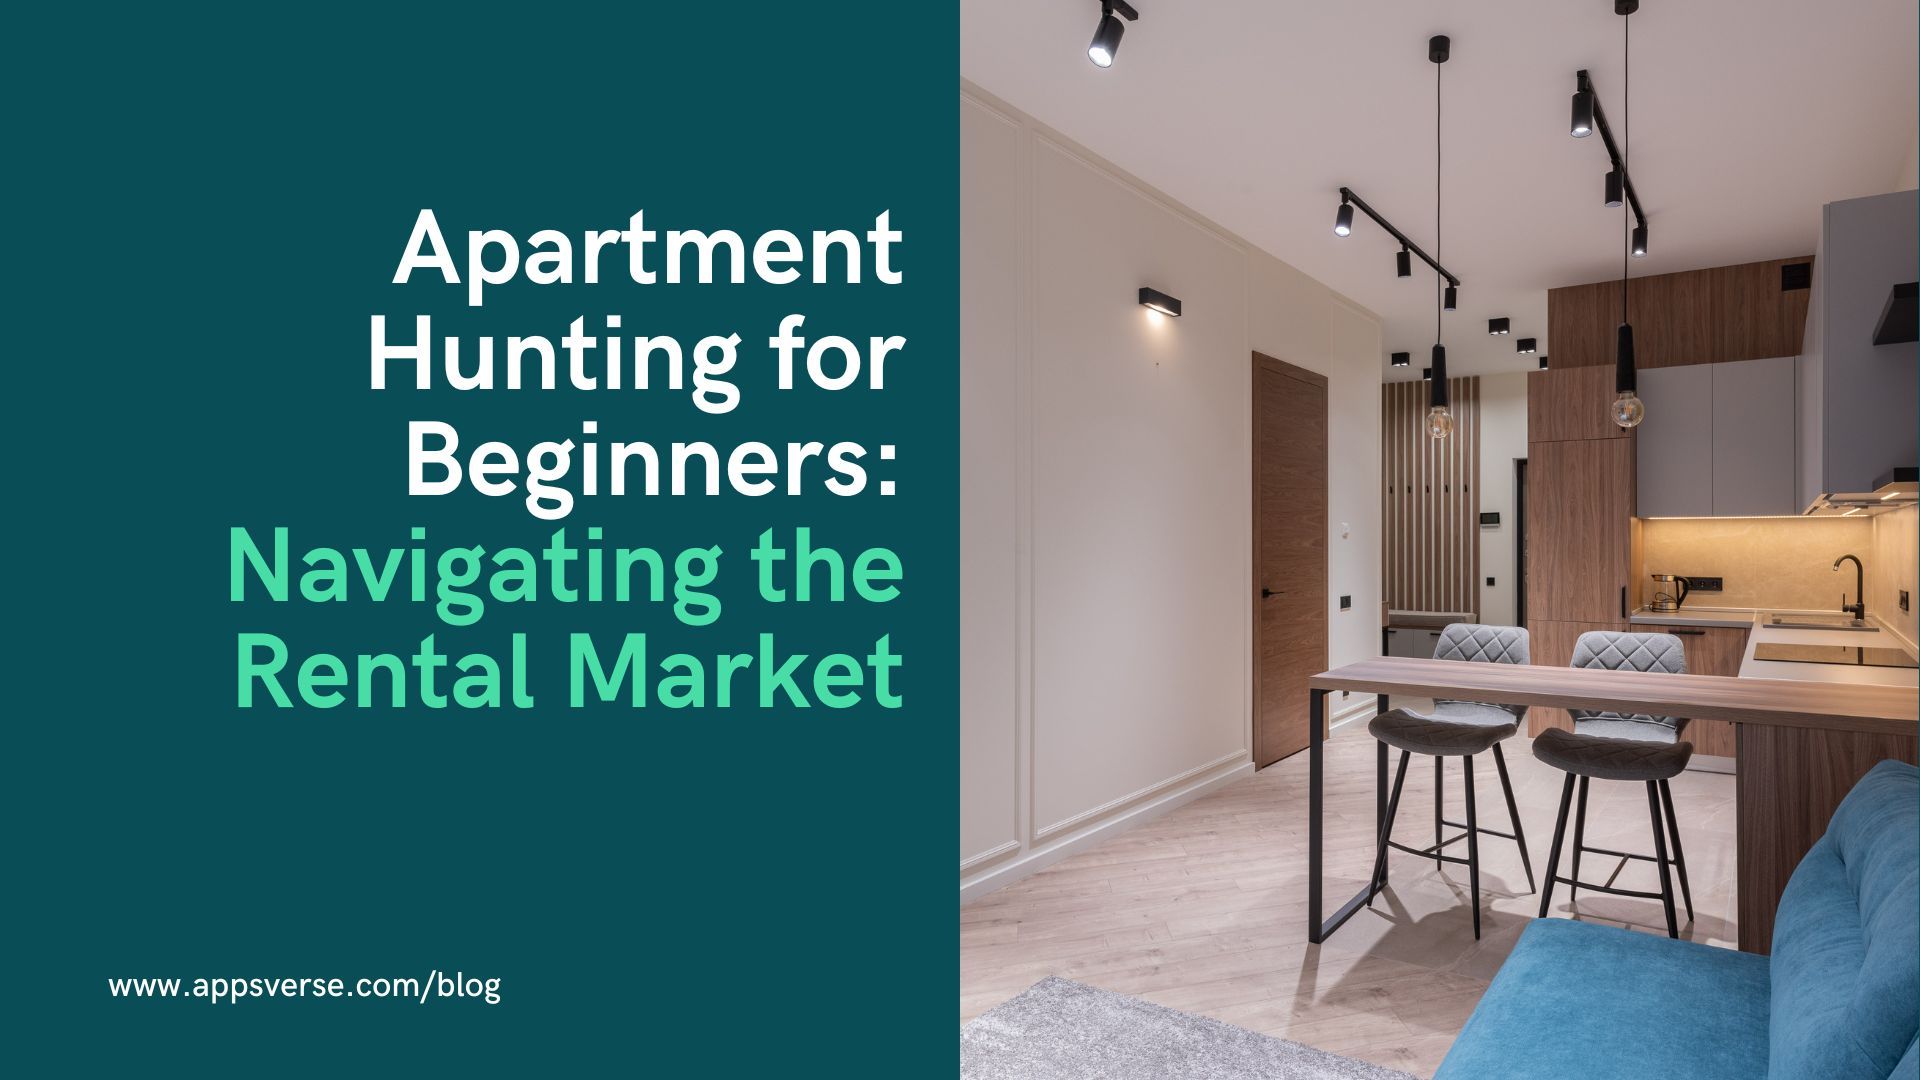 Apartment Hunting for Beginners: Navigating the Rental Market